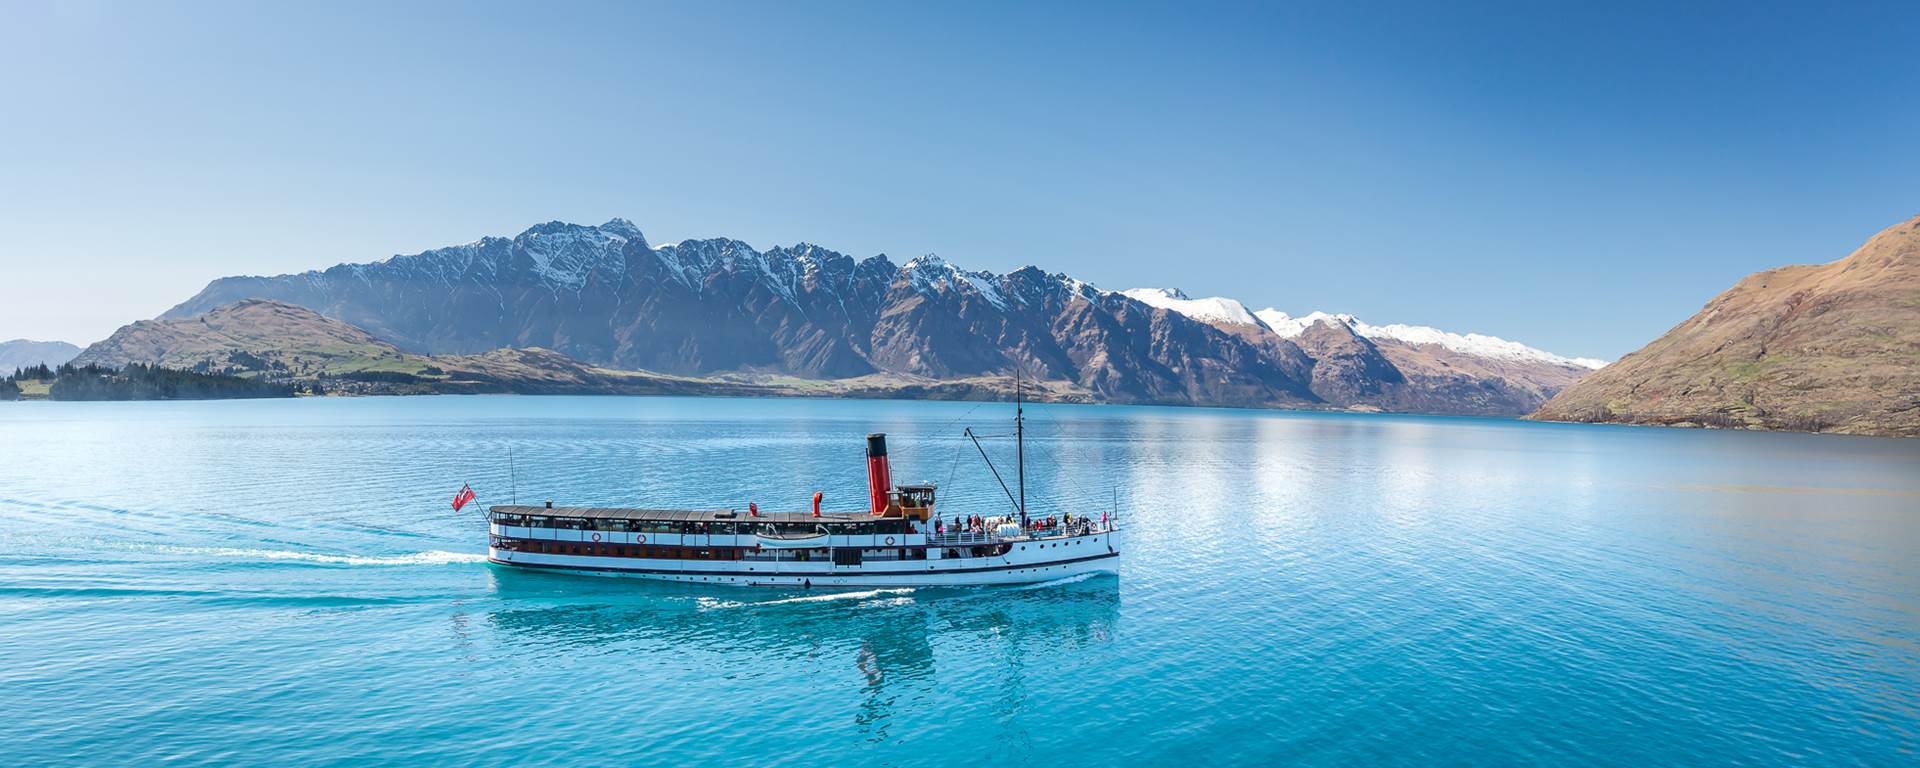 The TSS Earnslaw cruises across Lake Wakatipu with Remarkables in the background